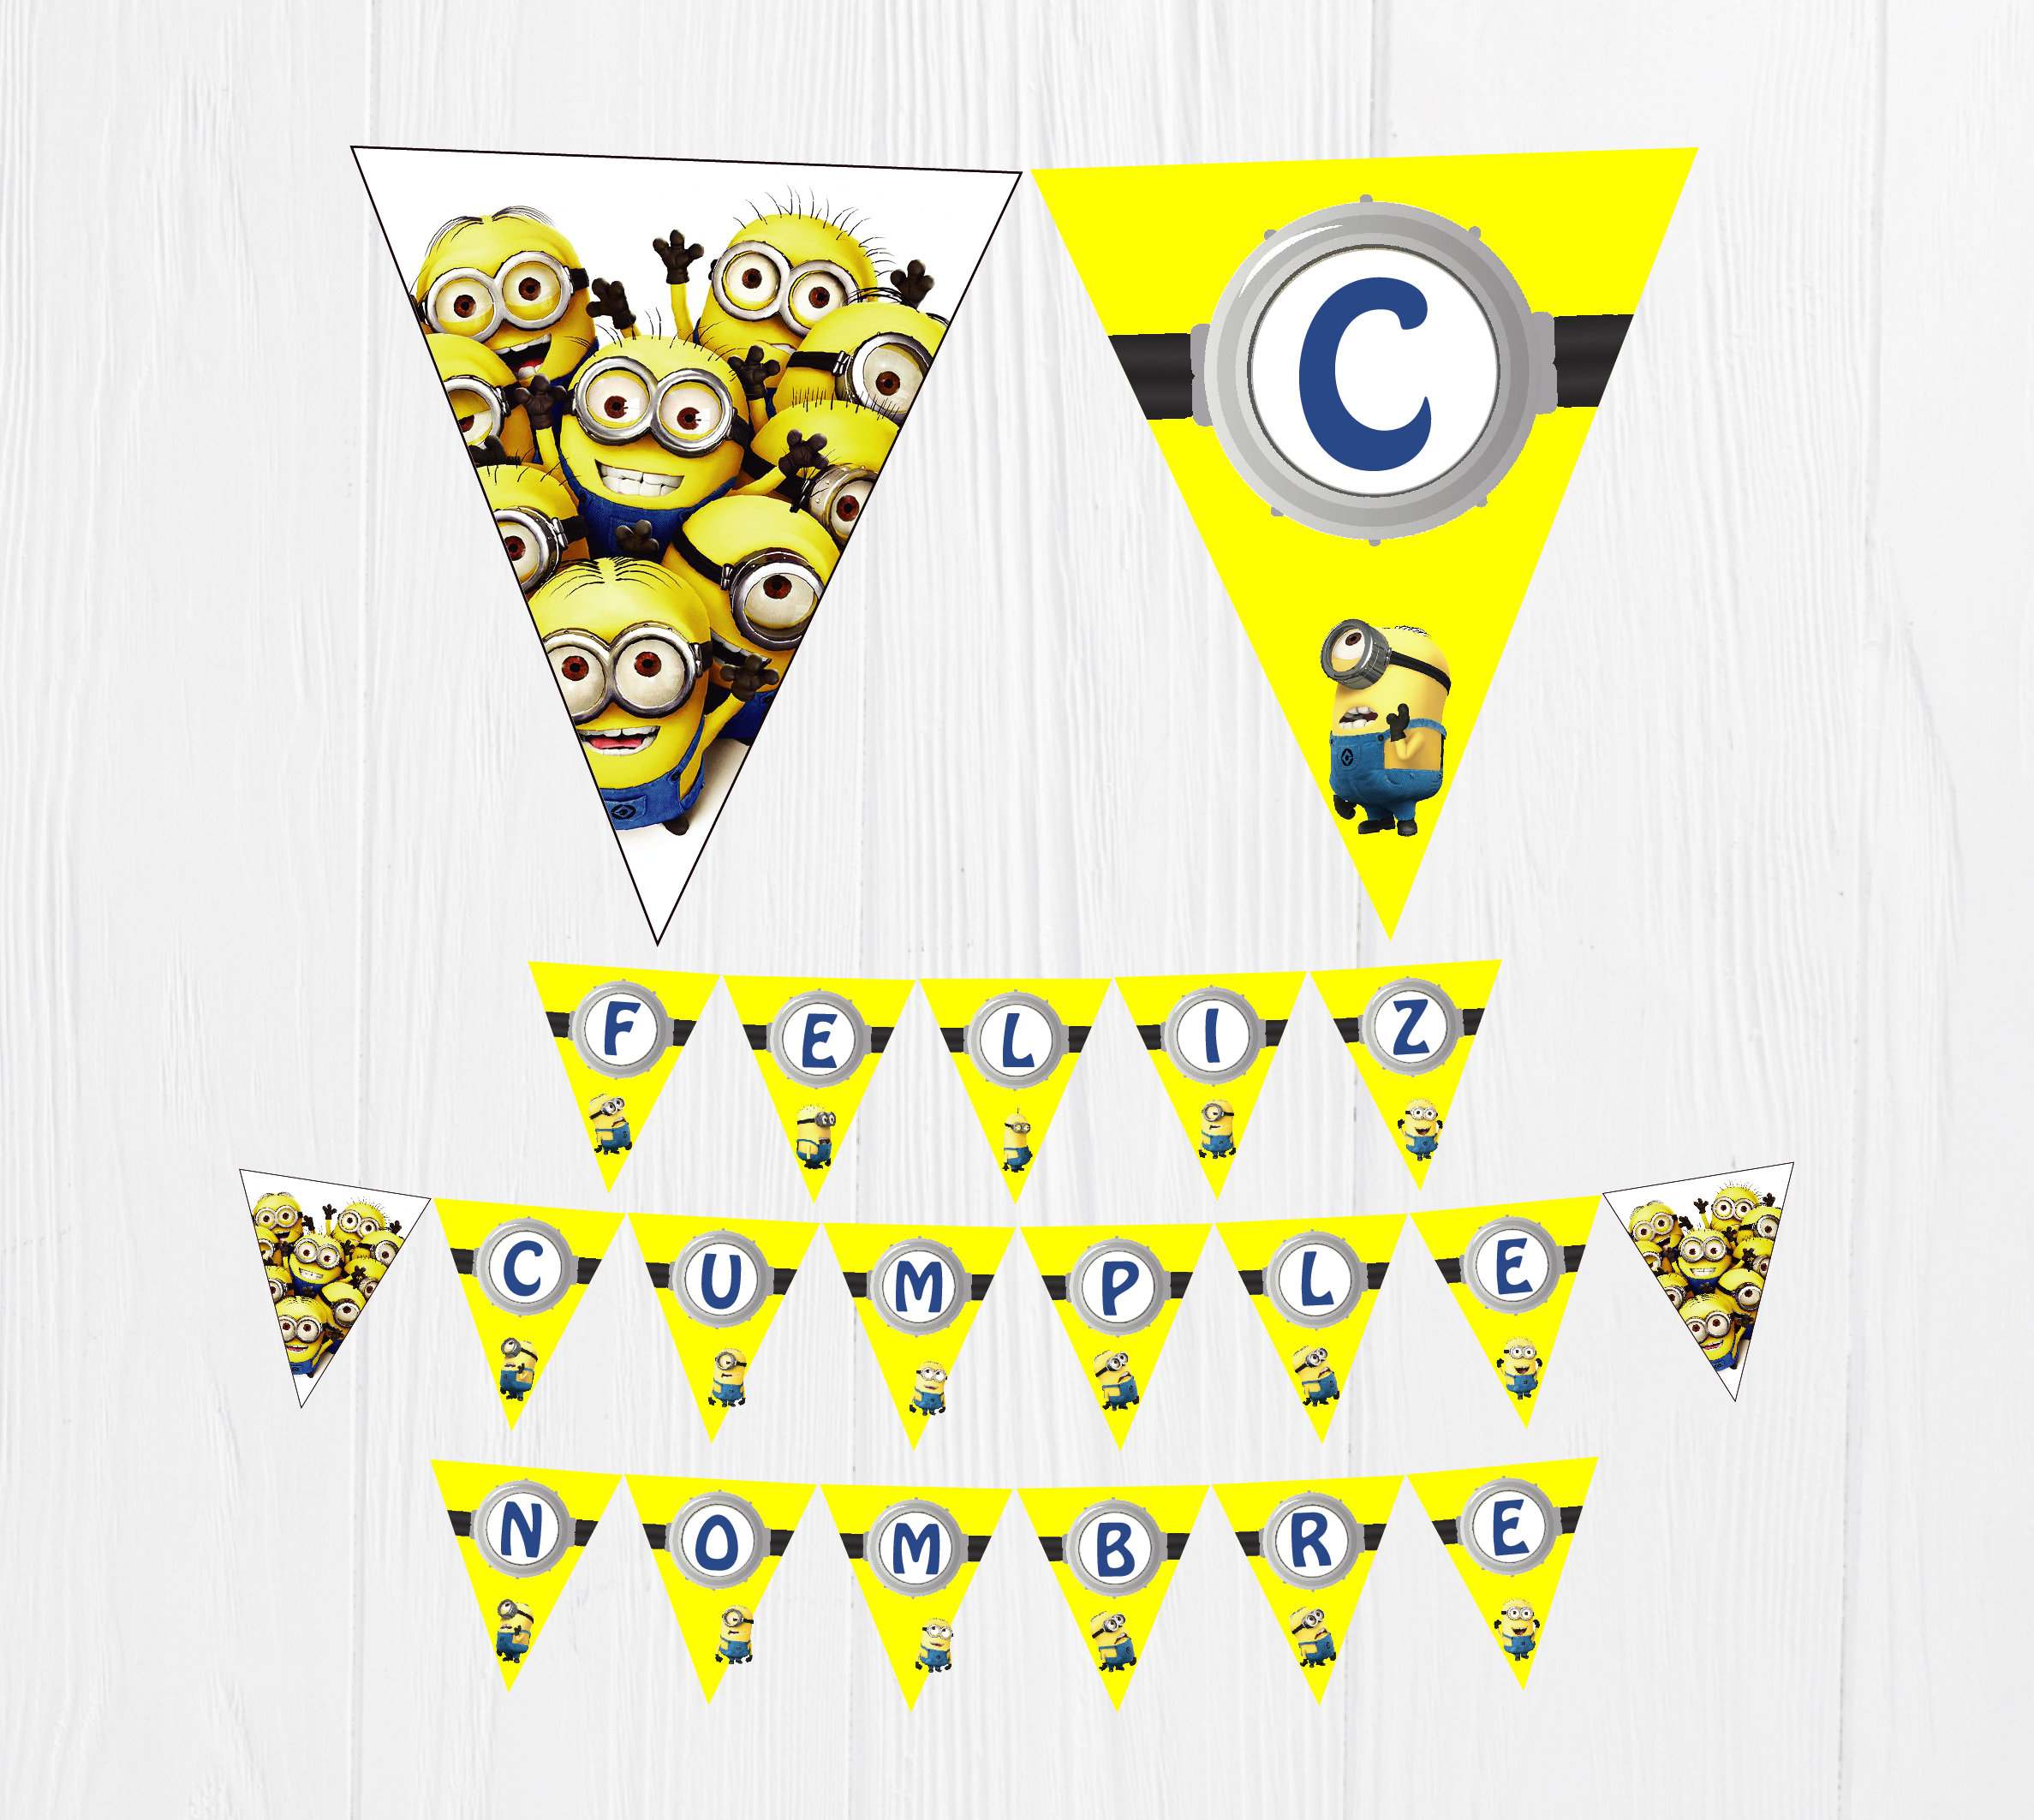 Buy REAL MADRID Birthday Printable Banner Party FC Banderín Real Madrid  Feliz Cumpleaños Imprimible Real Madrid Party Ideas Bunting Online in India  